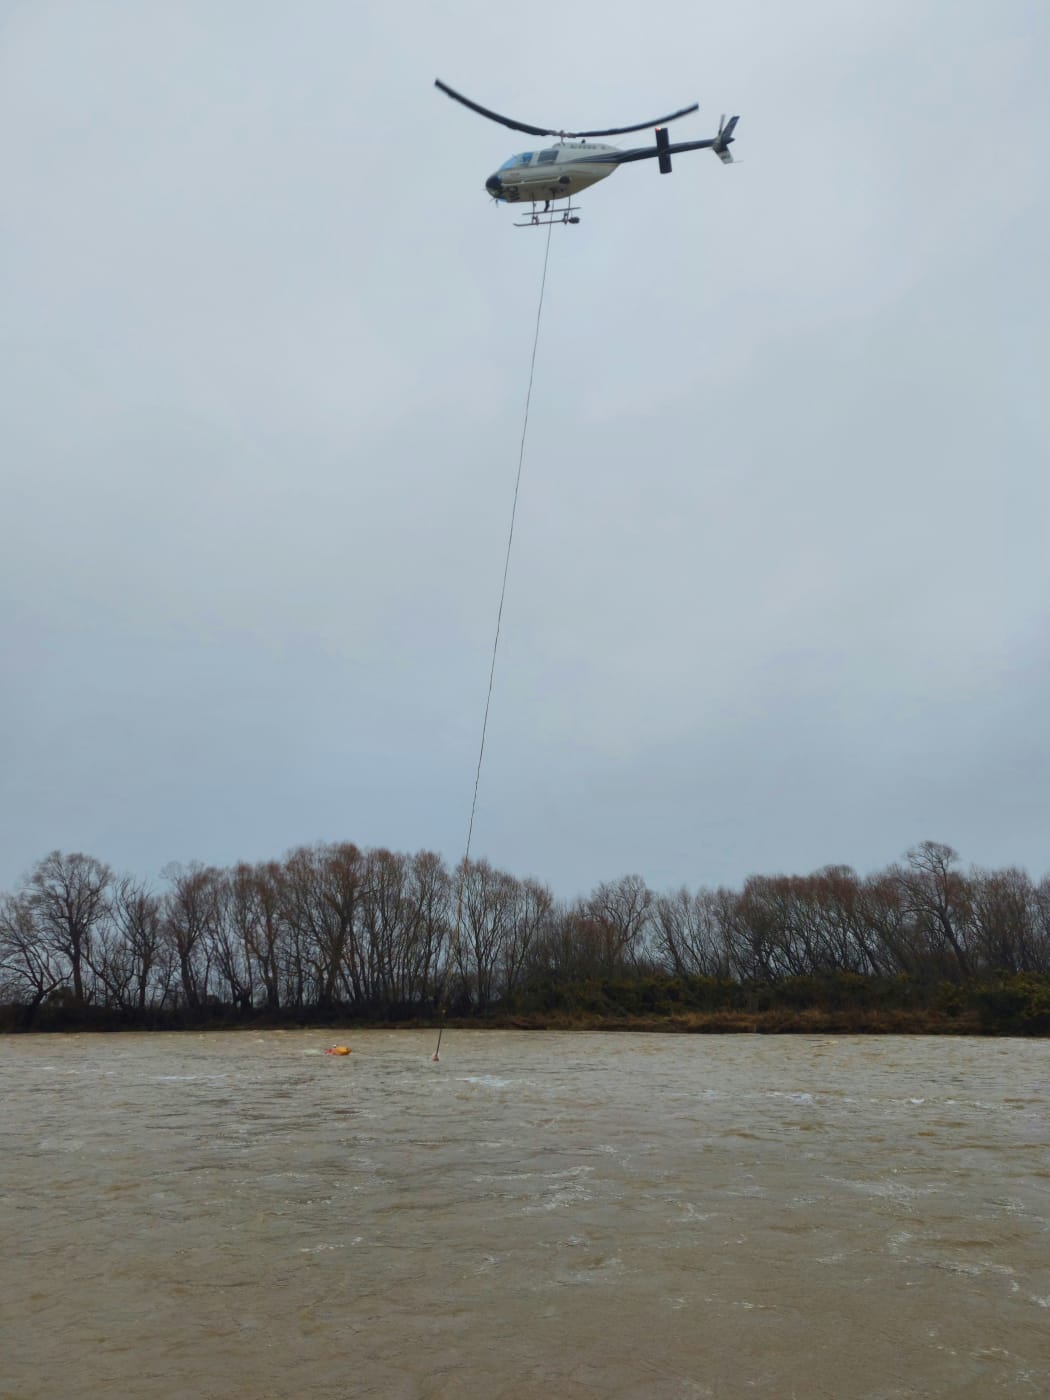 An acoustic doppler current profiler was towed across the Kauru river multiple times to get a highly-accurate flow data.